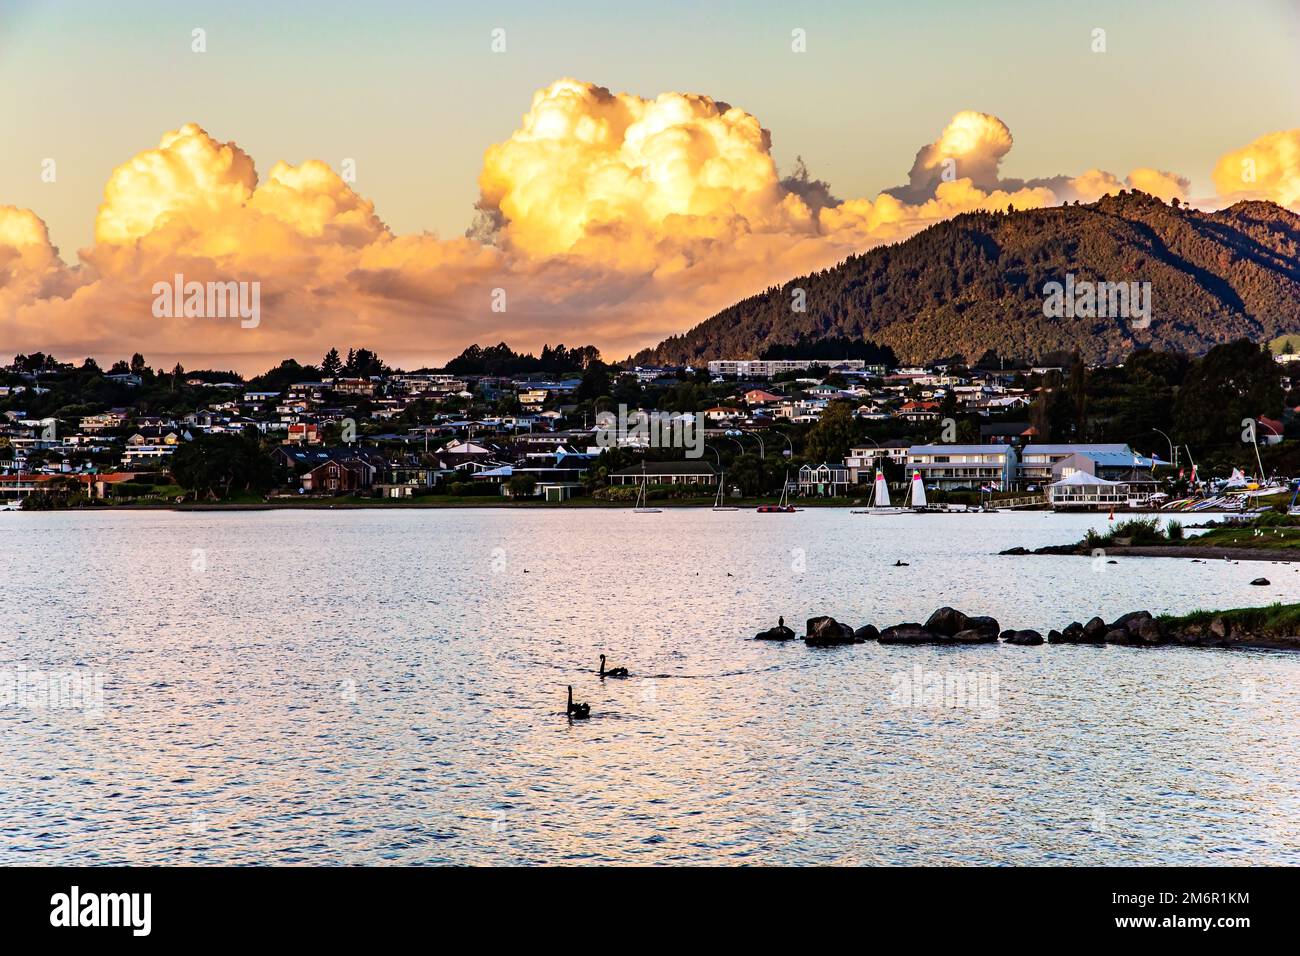 The picturesque town of Taupo Stock Photo